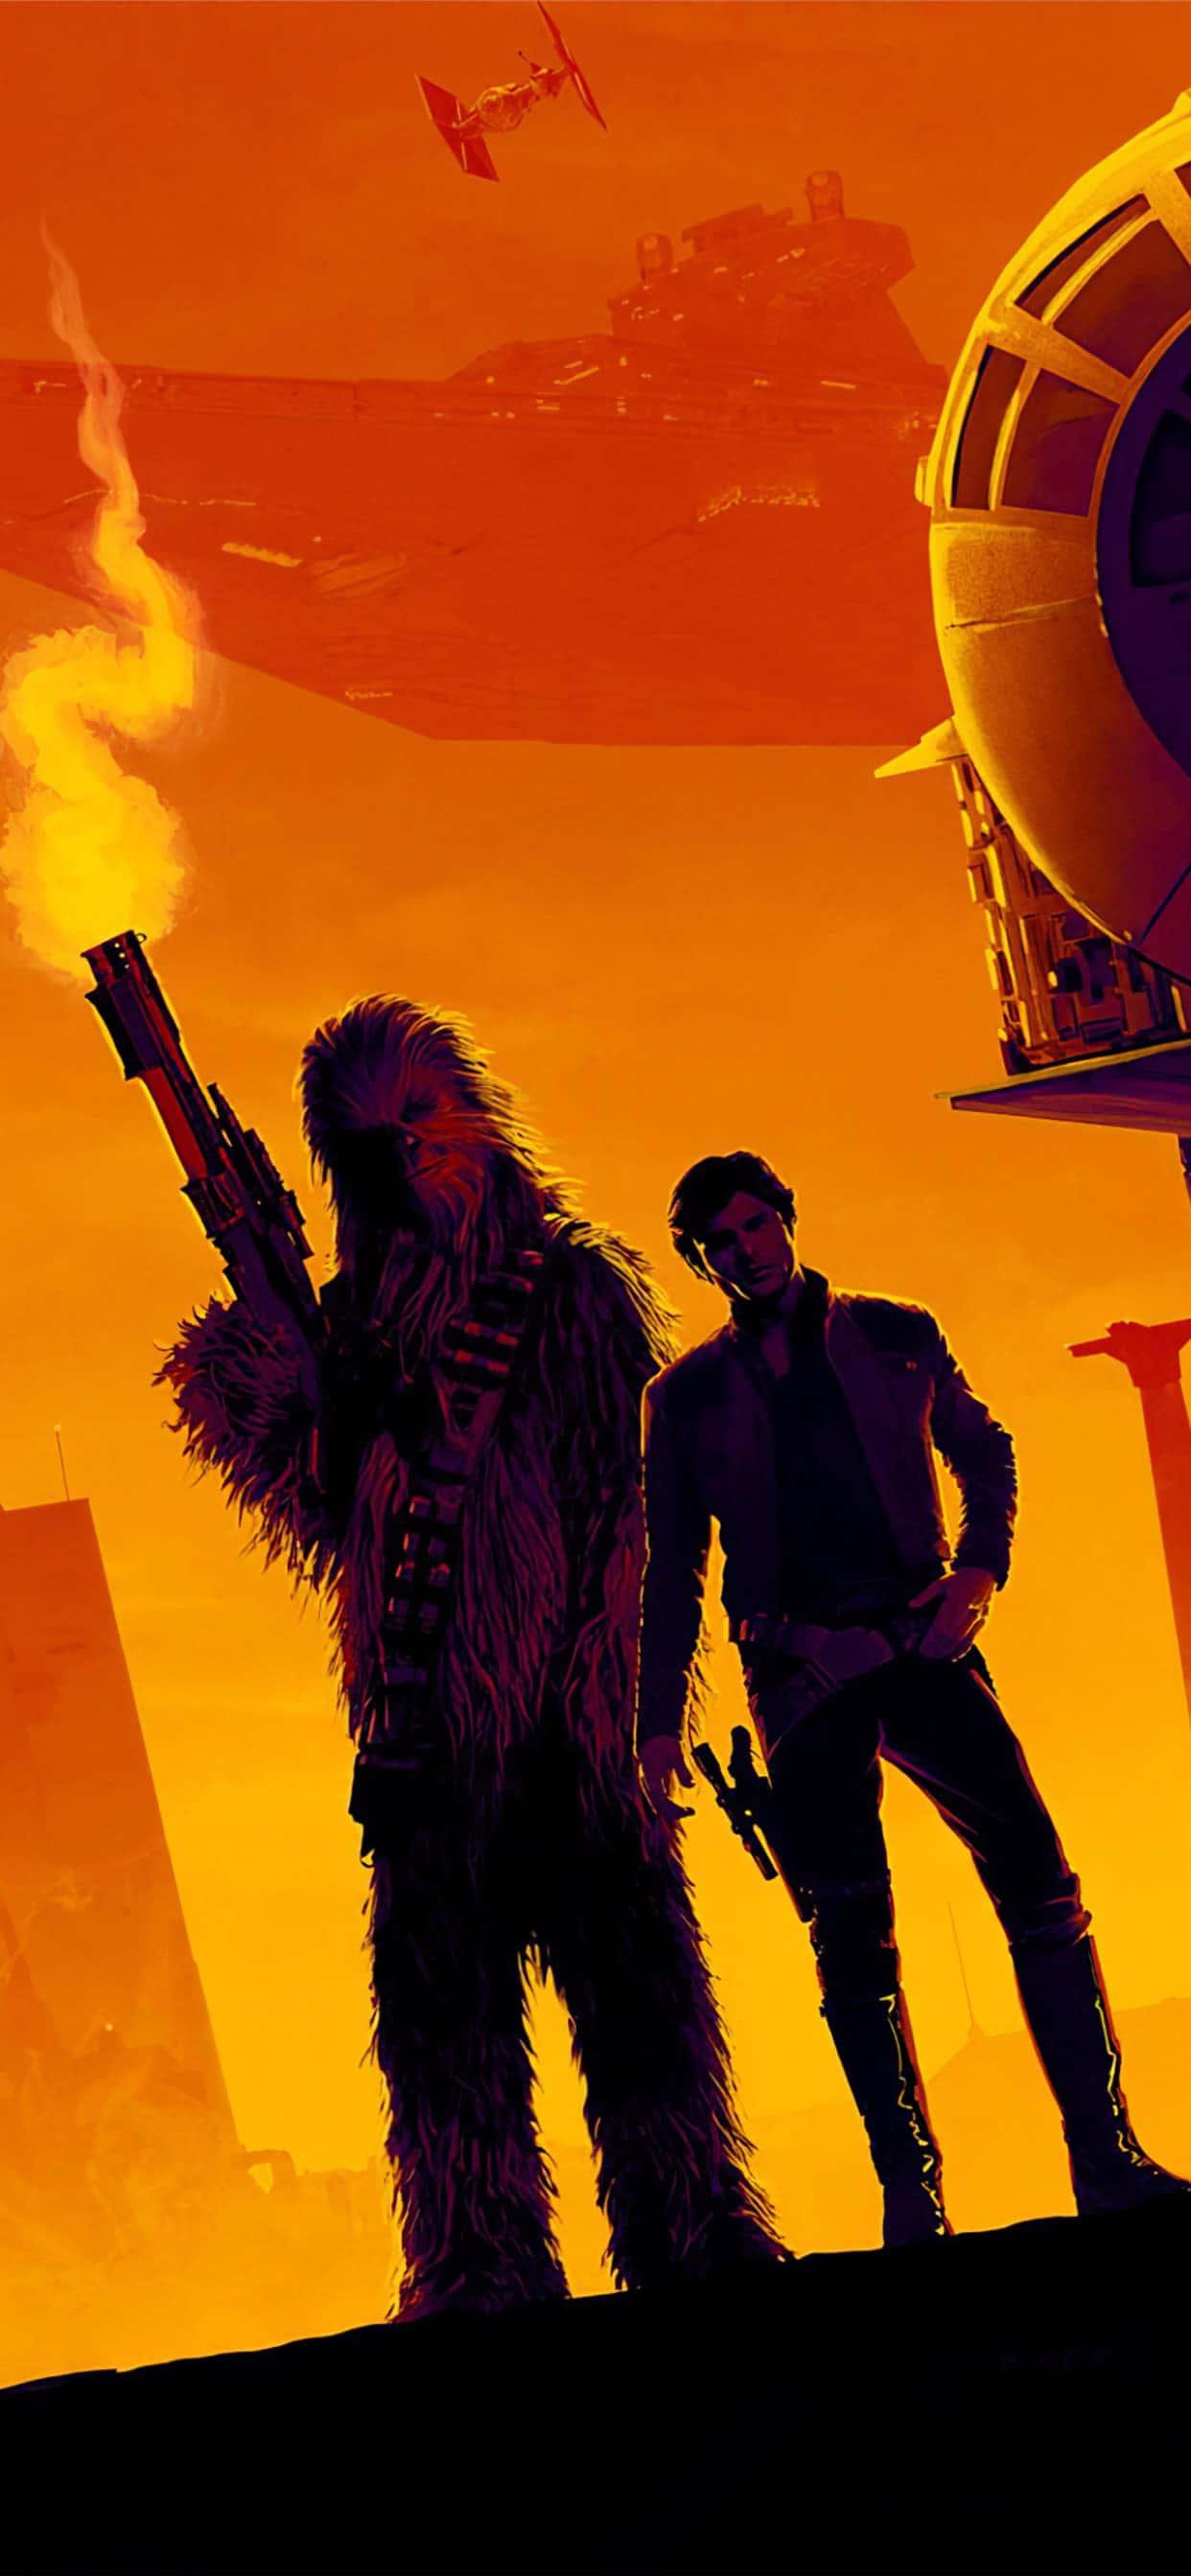 Han Solo And Chewbacca In A Star Wars Story